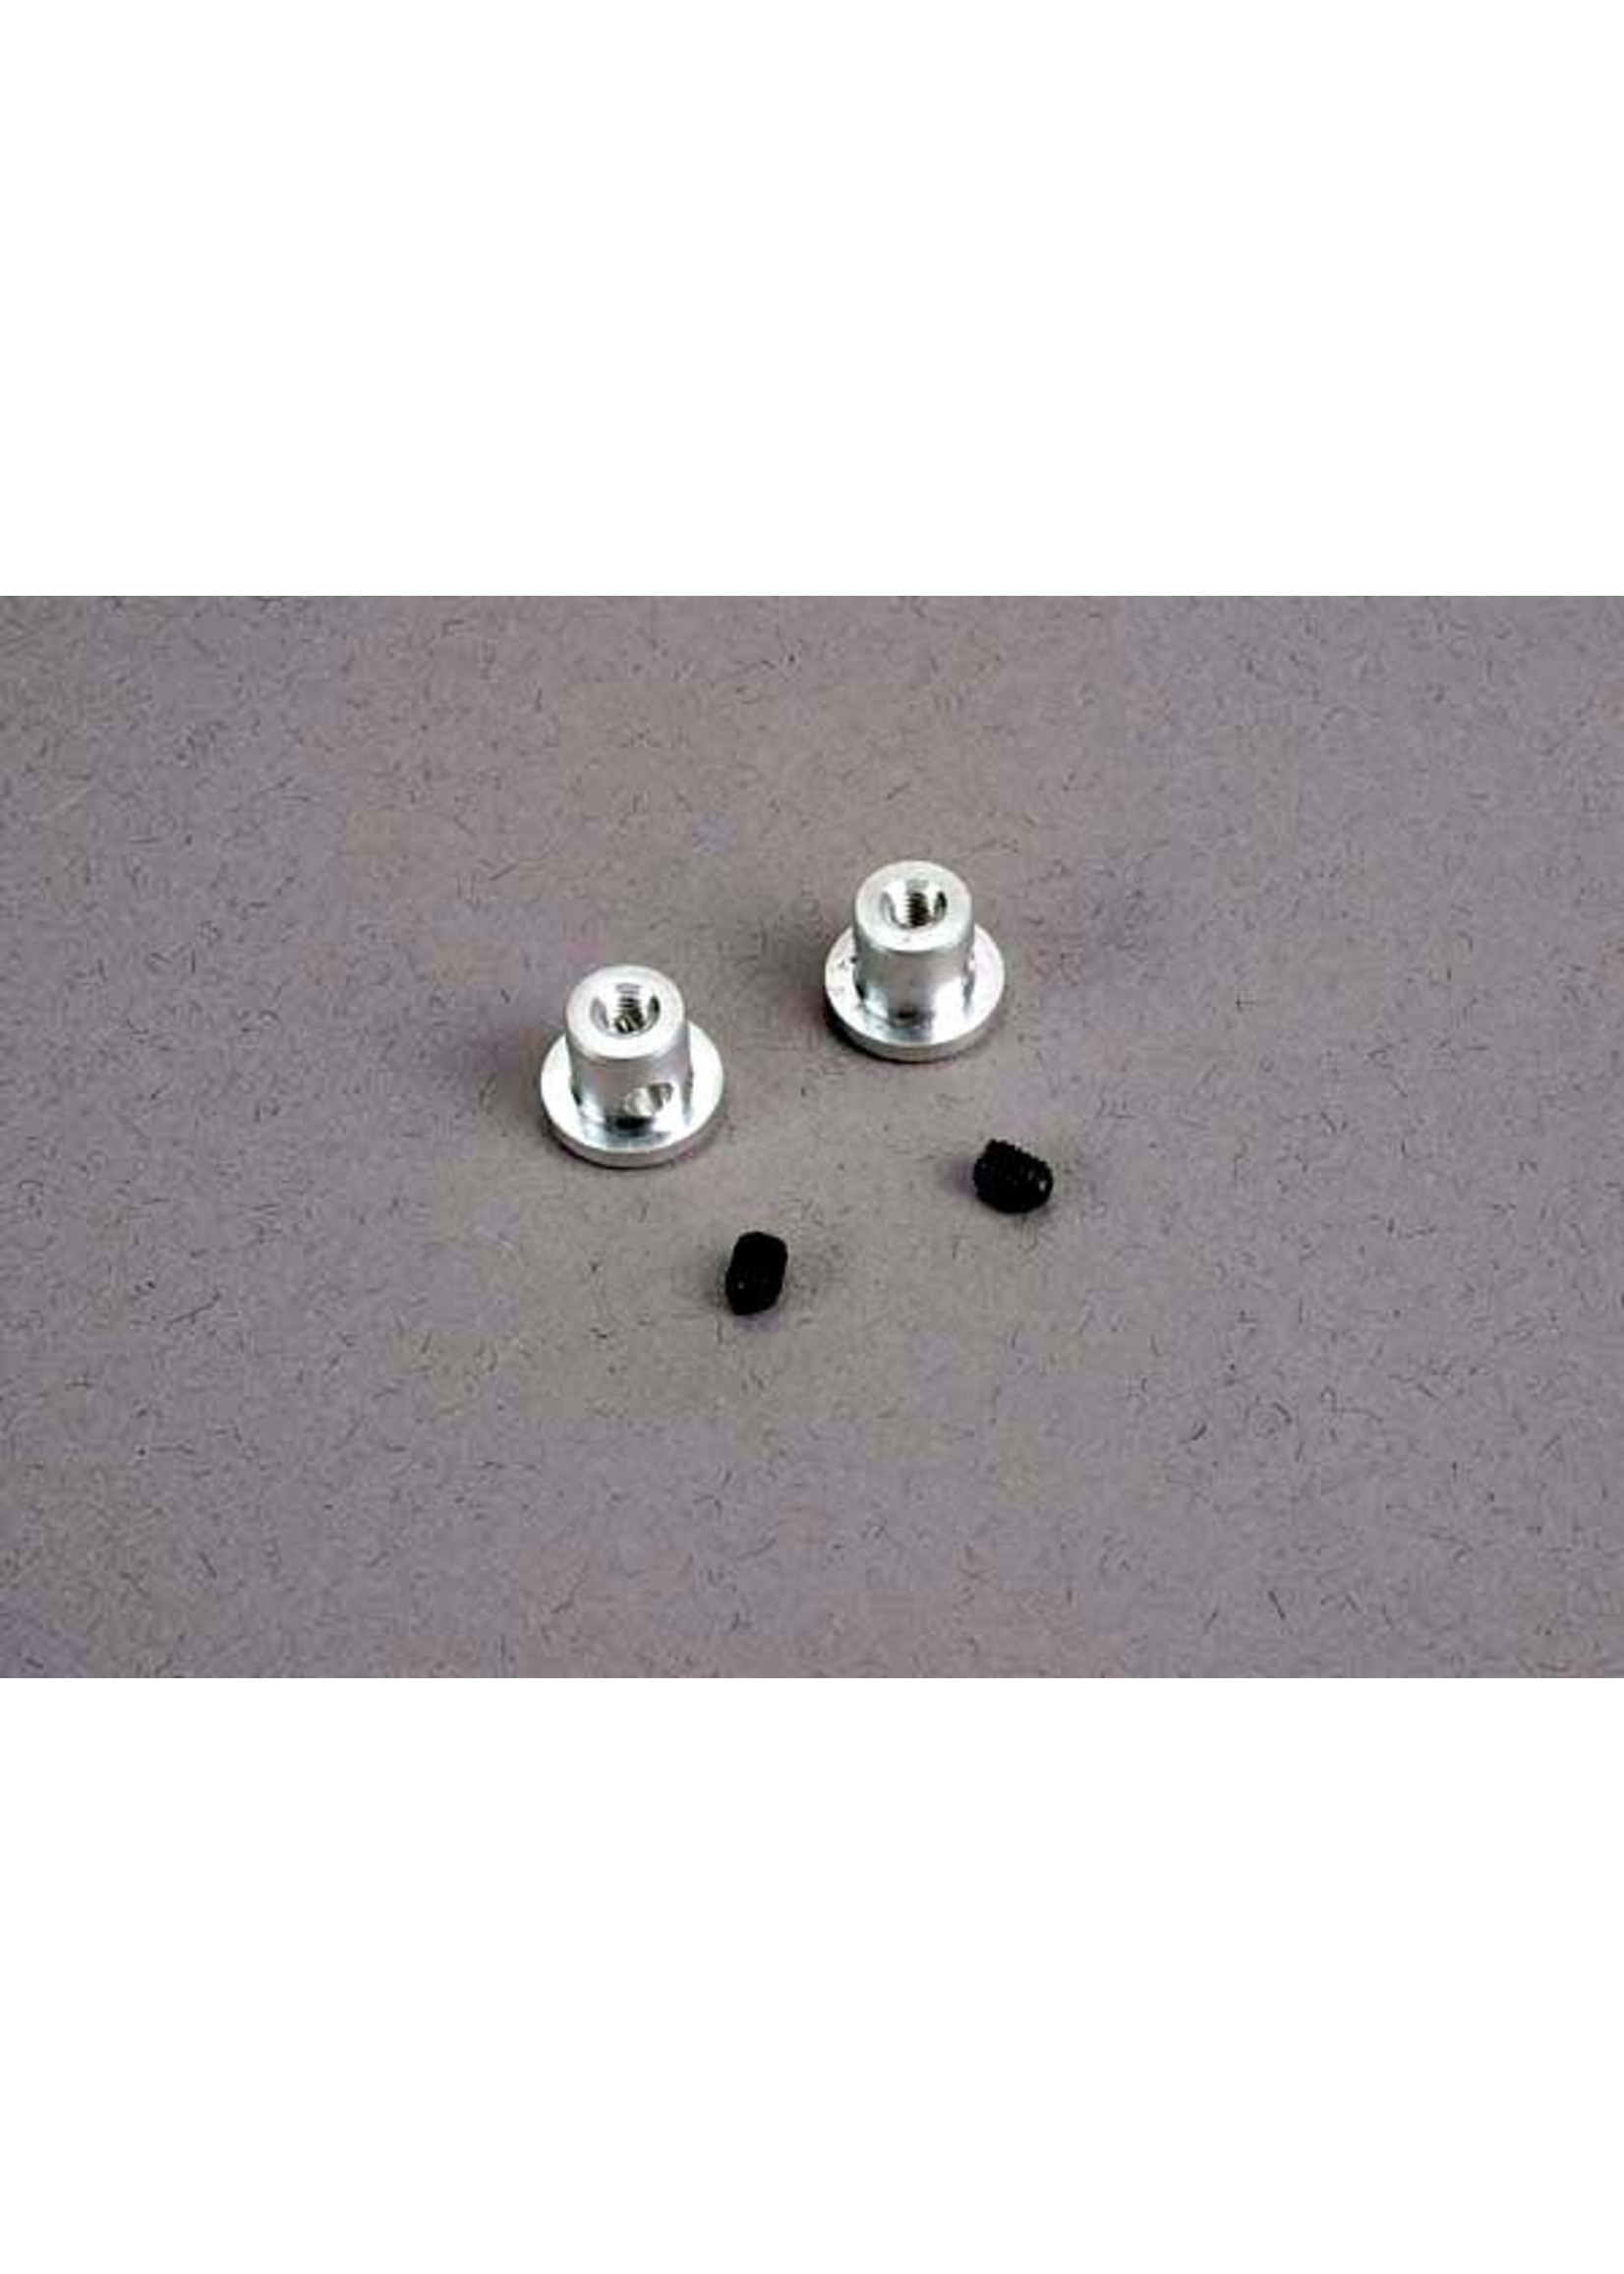 Traxxas TRA2615 Traxxas Wing buttons (2)/ set screws (2)/ spacers (2)/ 3x8mm CS (2)